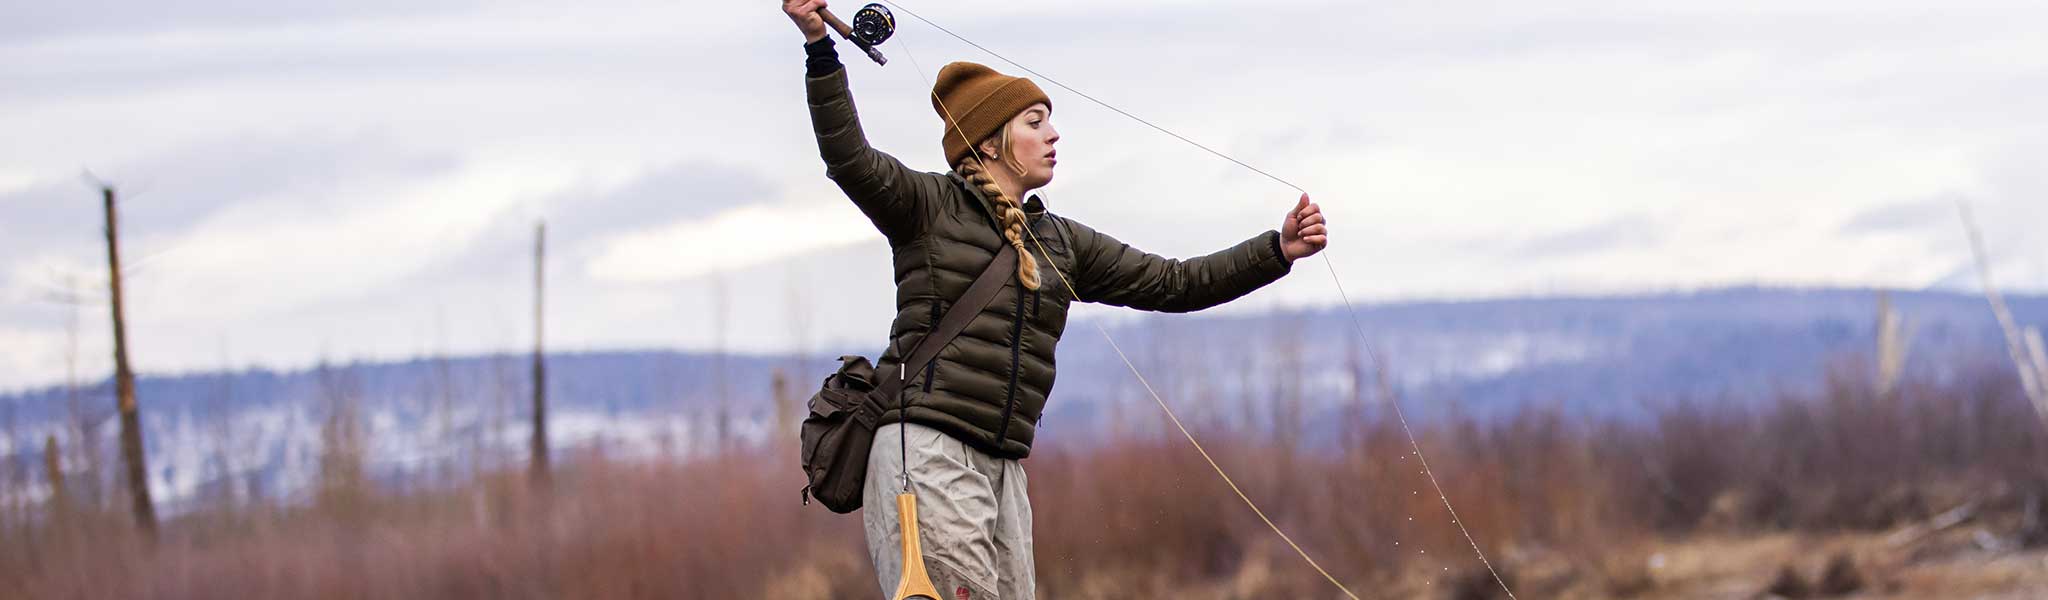 Women's Outdoor Clothing, Hunting, Hiking & More